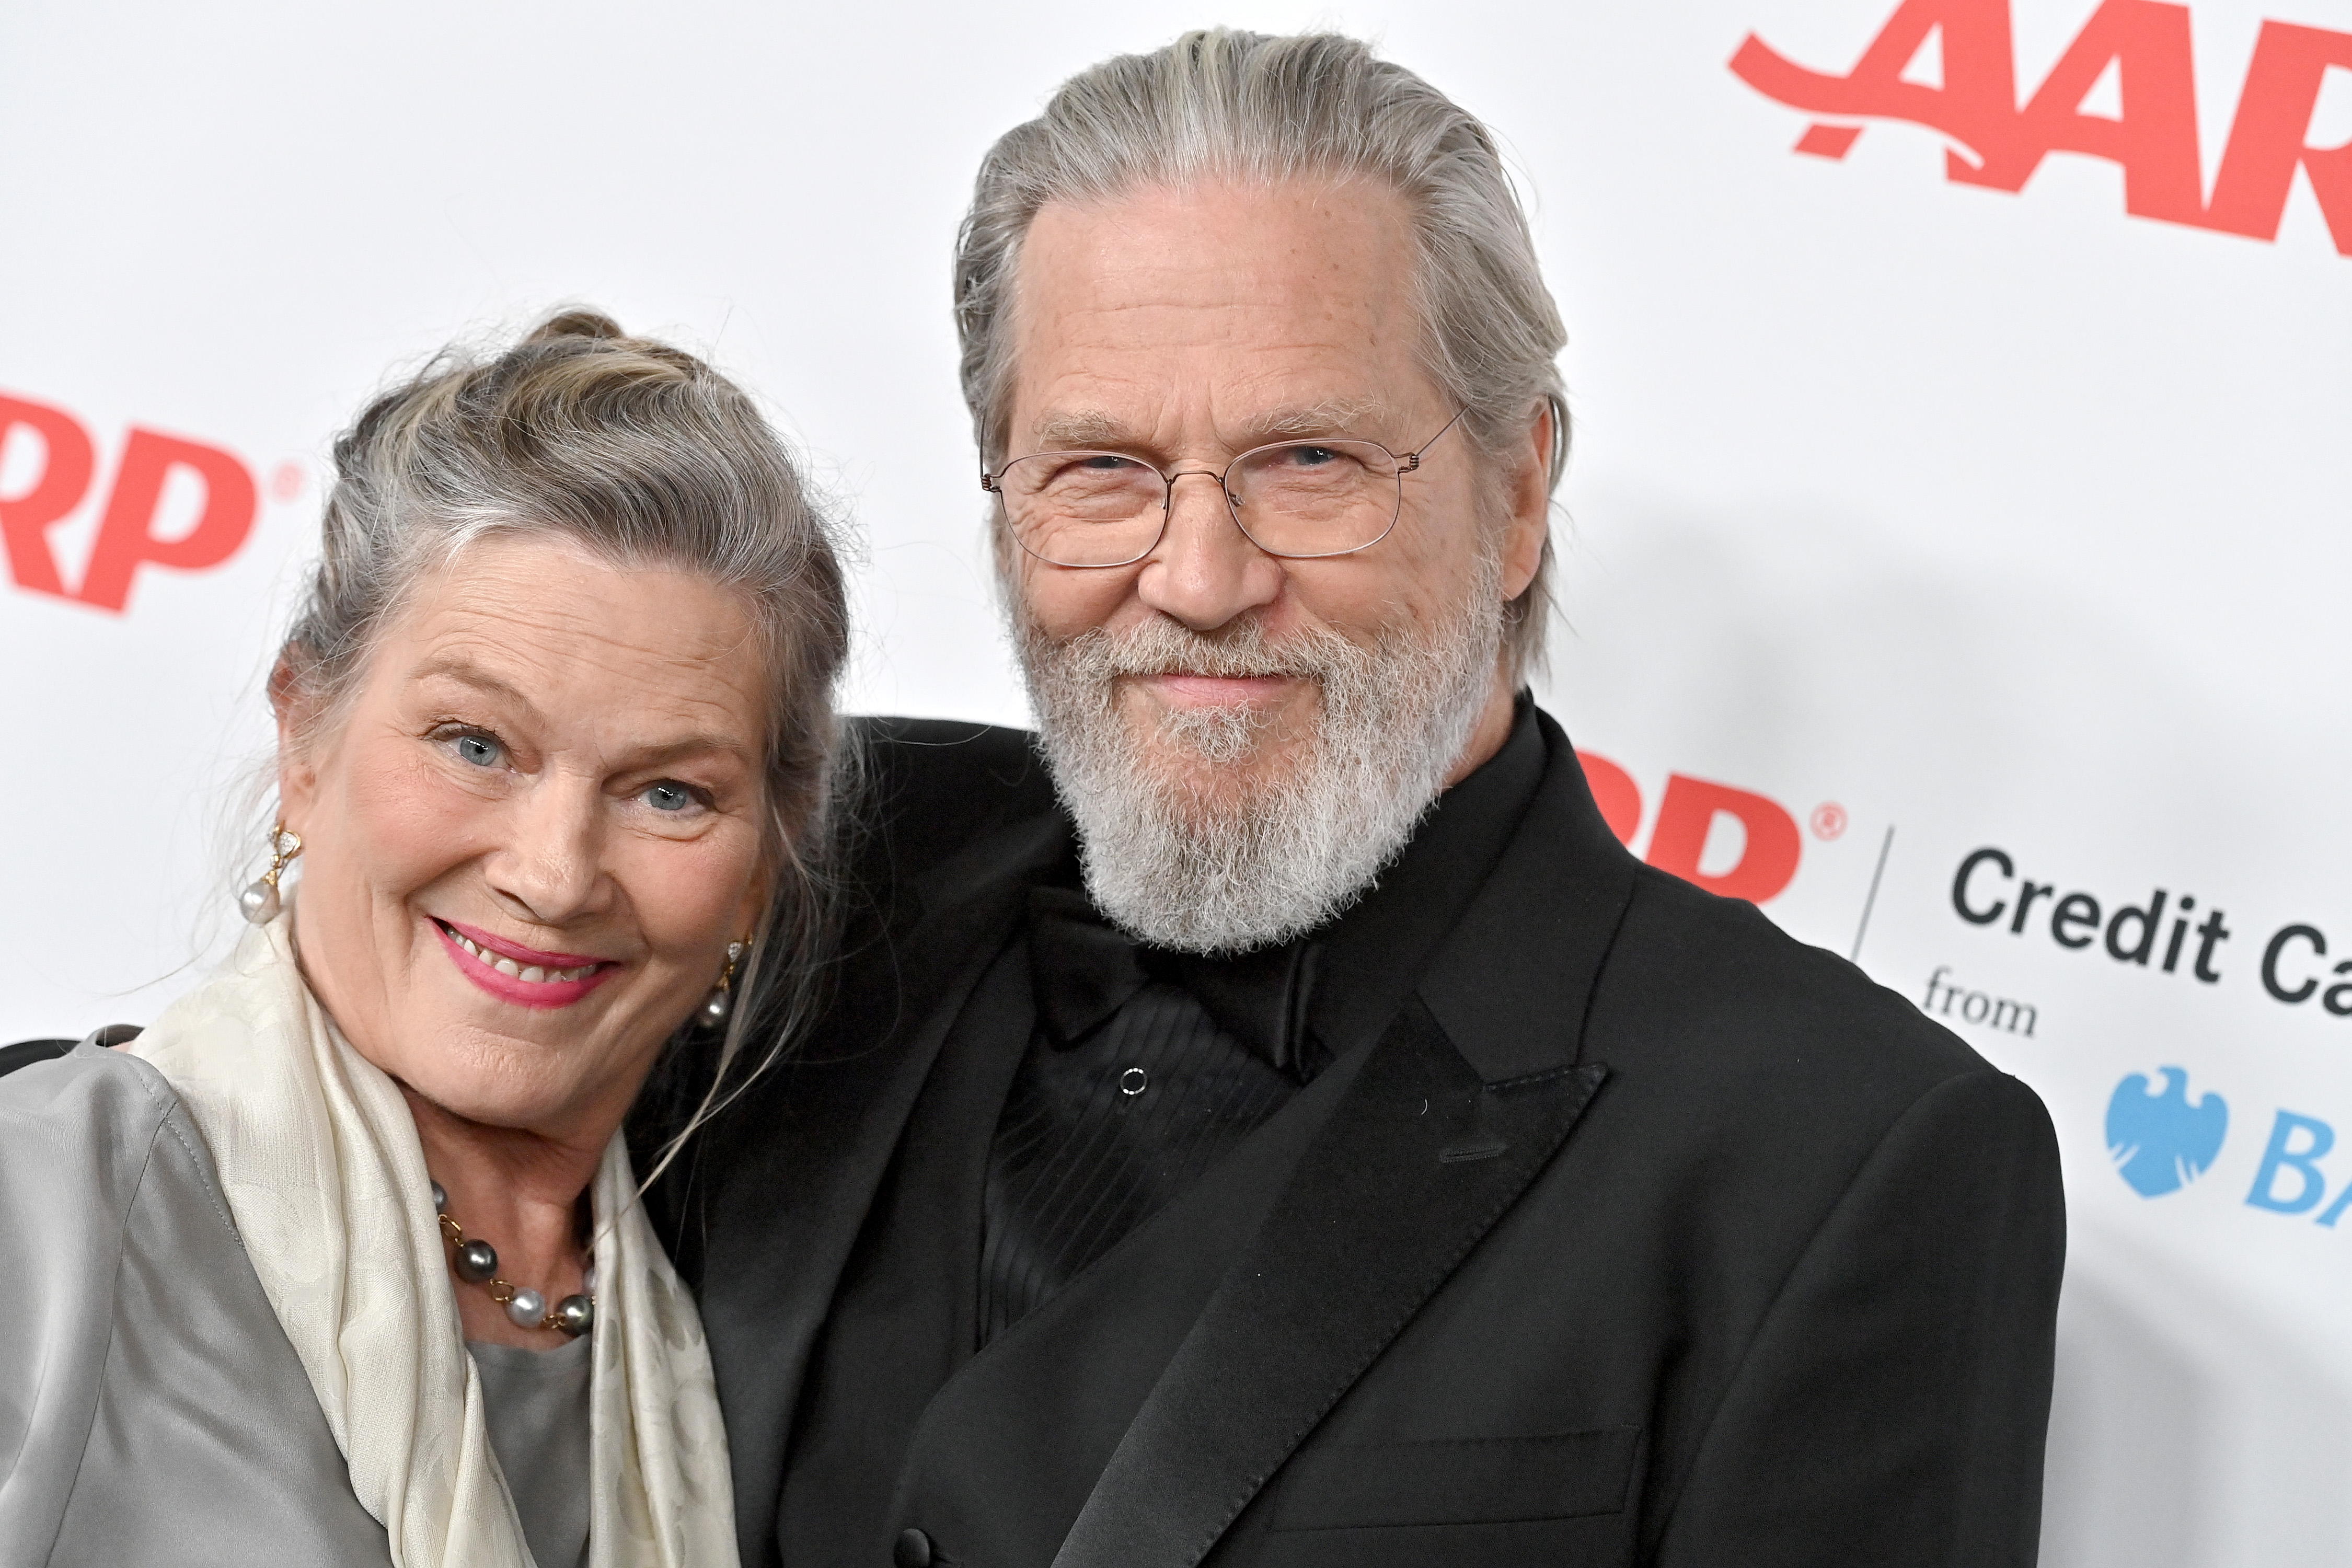 Susan Bridges and Jeff Bridges attend the "AARP The Magazine's" 21st Annual Movies For Grownups Awards at Beverly Wilshire, A Four Seasons Hotel, on January 28, 2023, in Beverly Hills, California. | Source: Getty Images